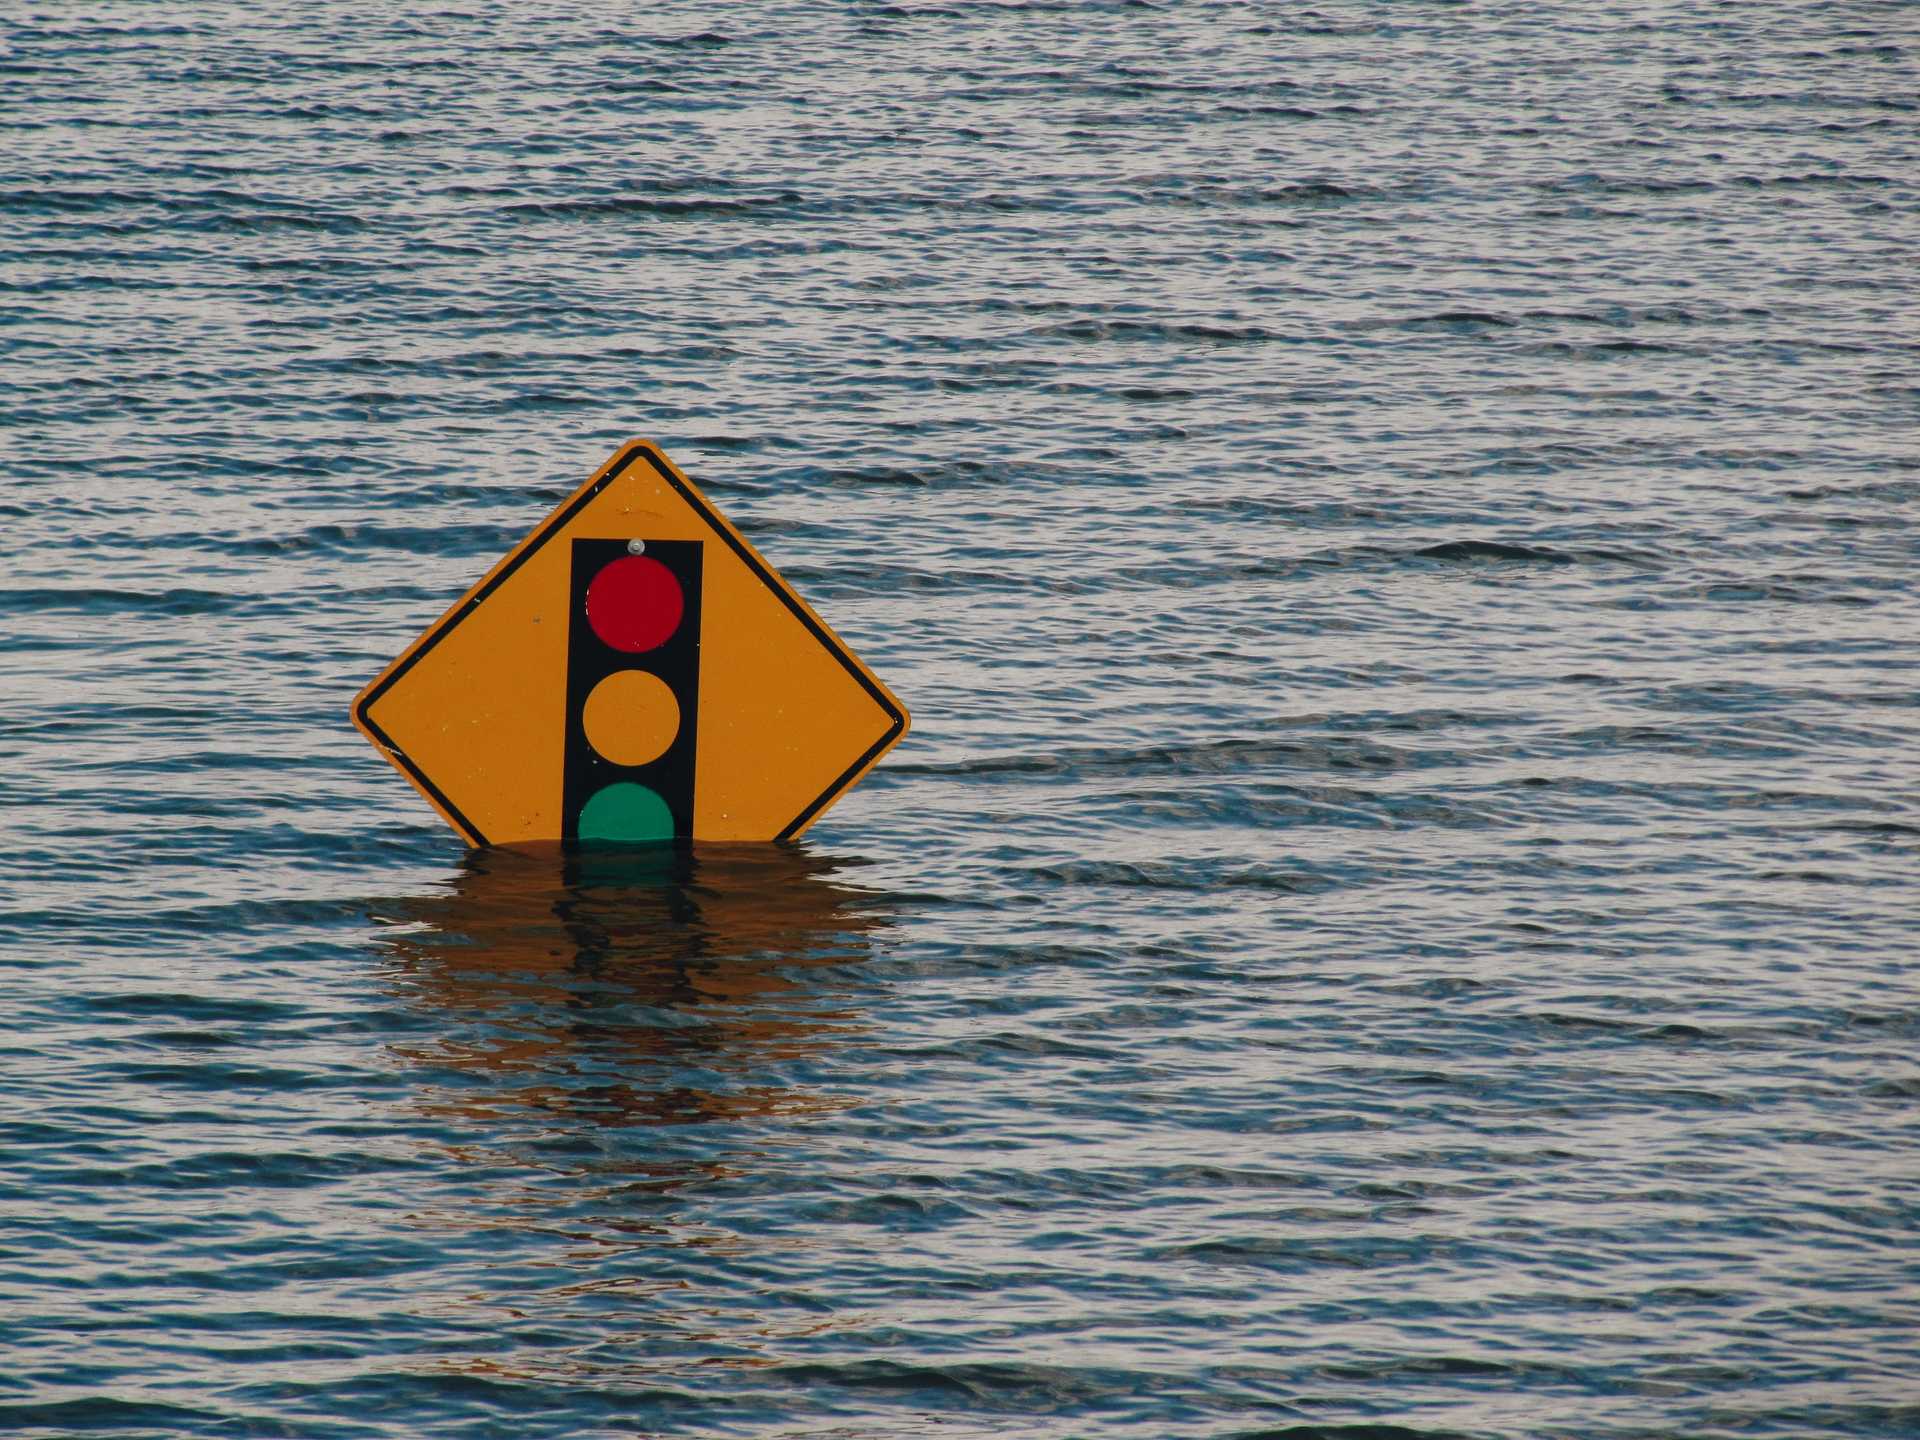 A traffic sign indicating a stop light is half submerged by flood waters.